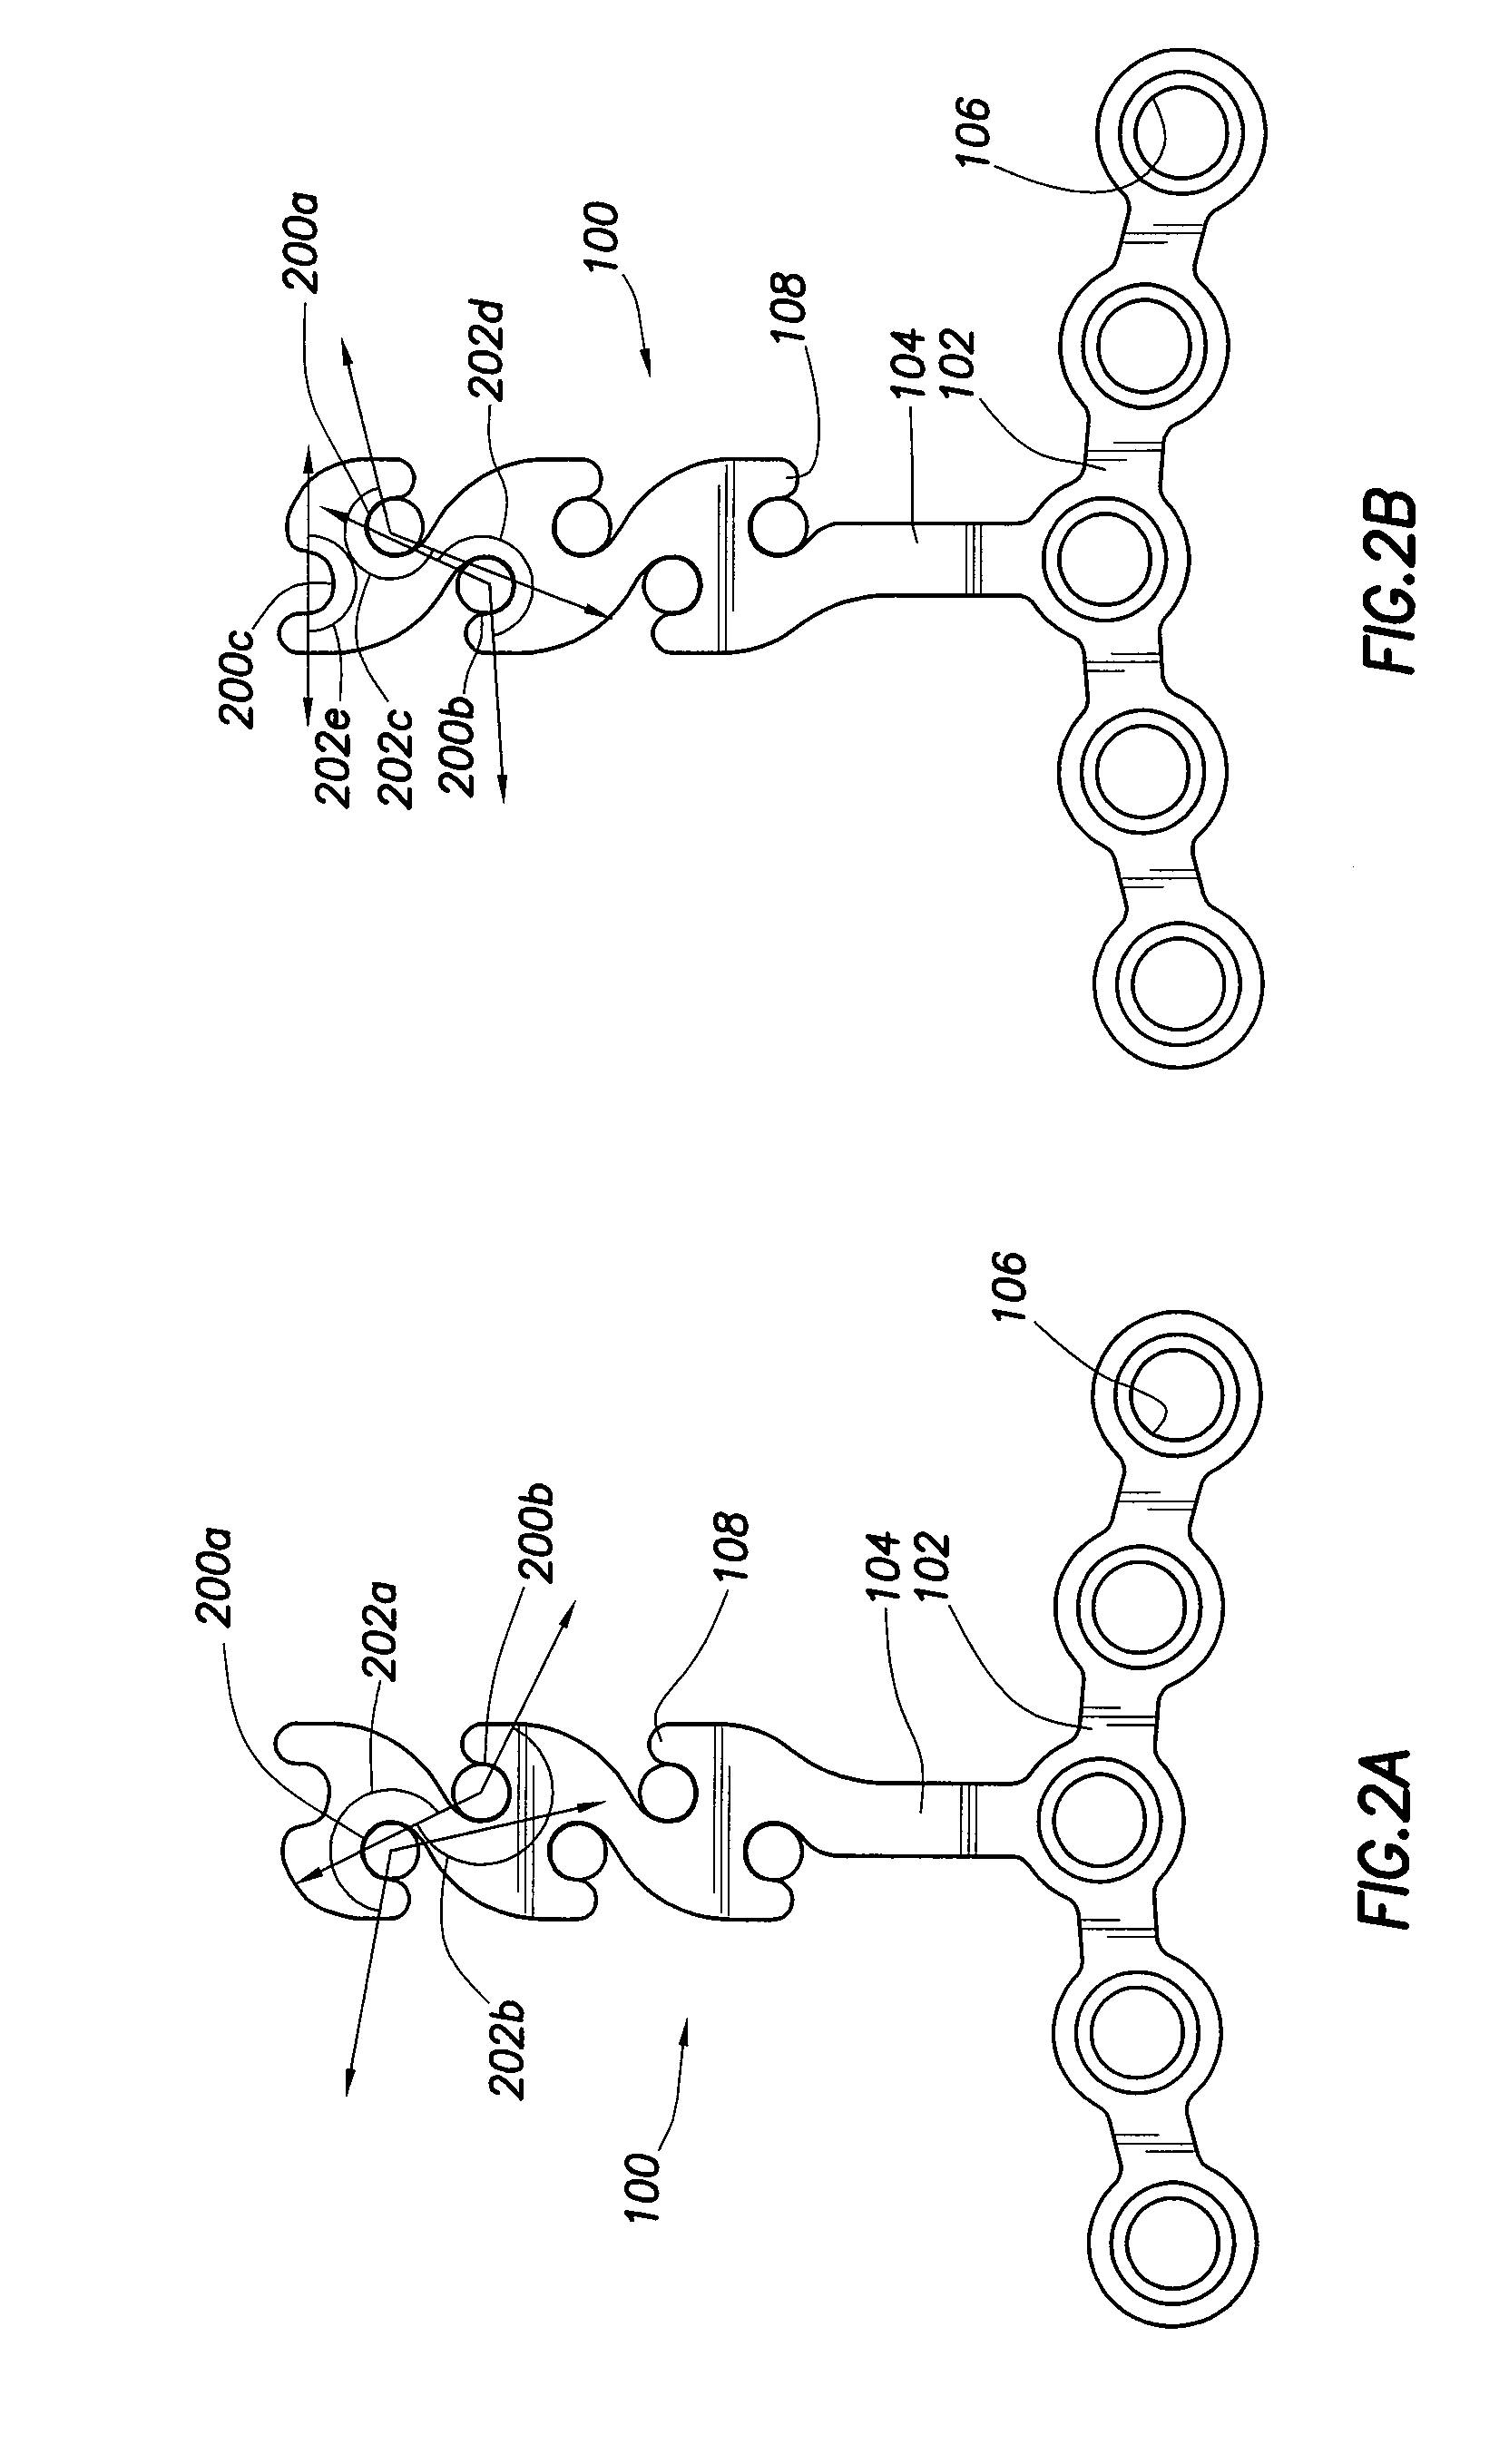 Orthodontic Plate and Method